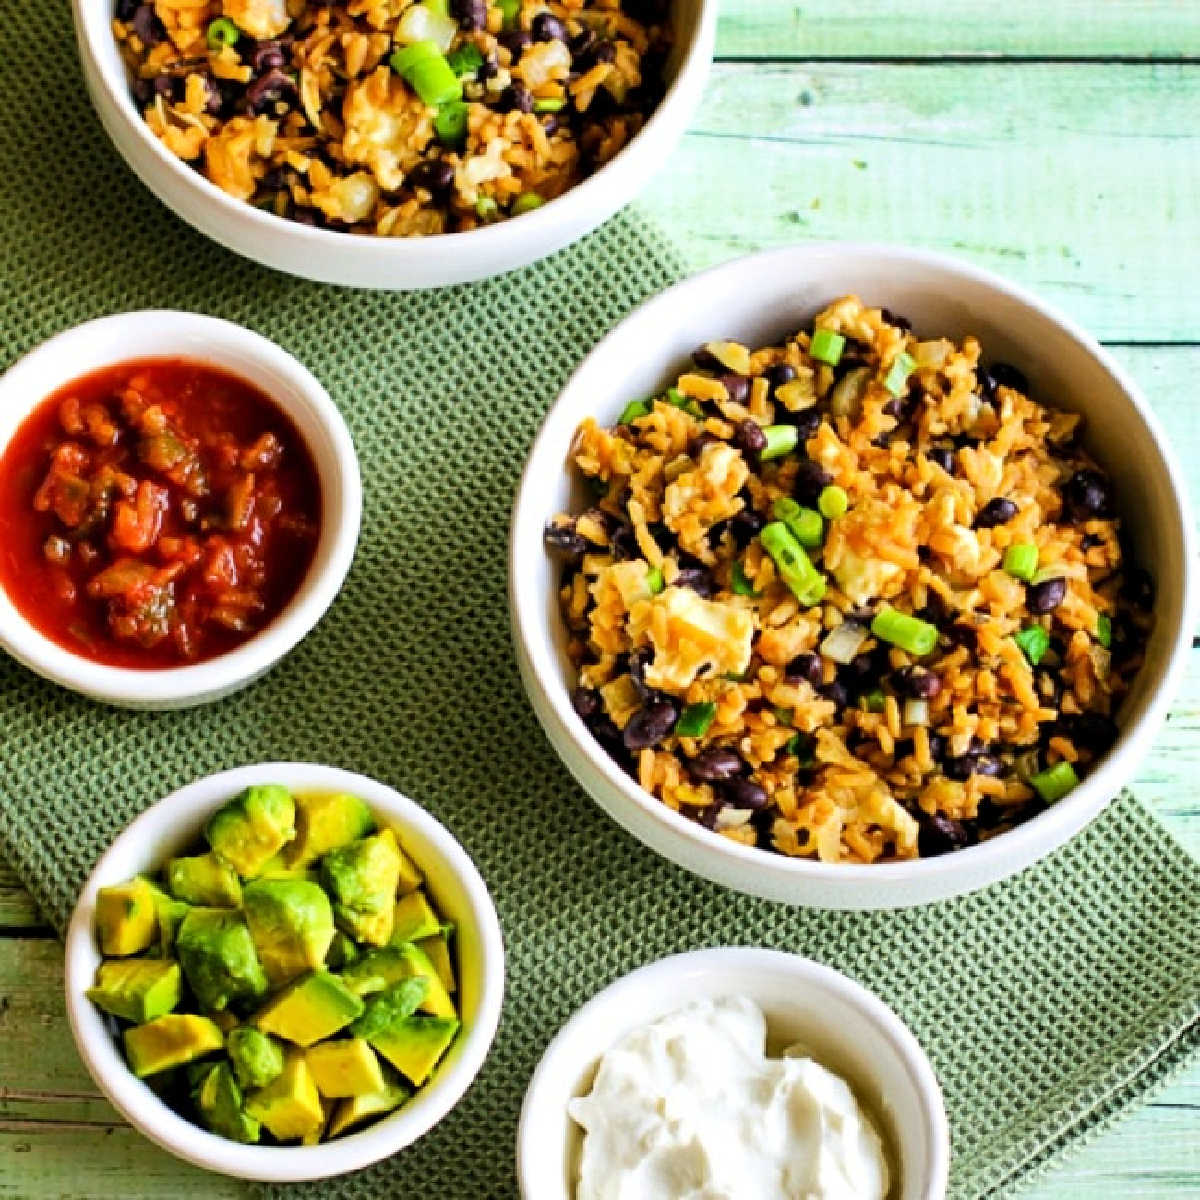 CrockPot Rice and Bean Bowl shown in two serving bowls with toppings.